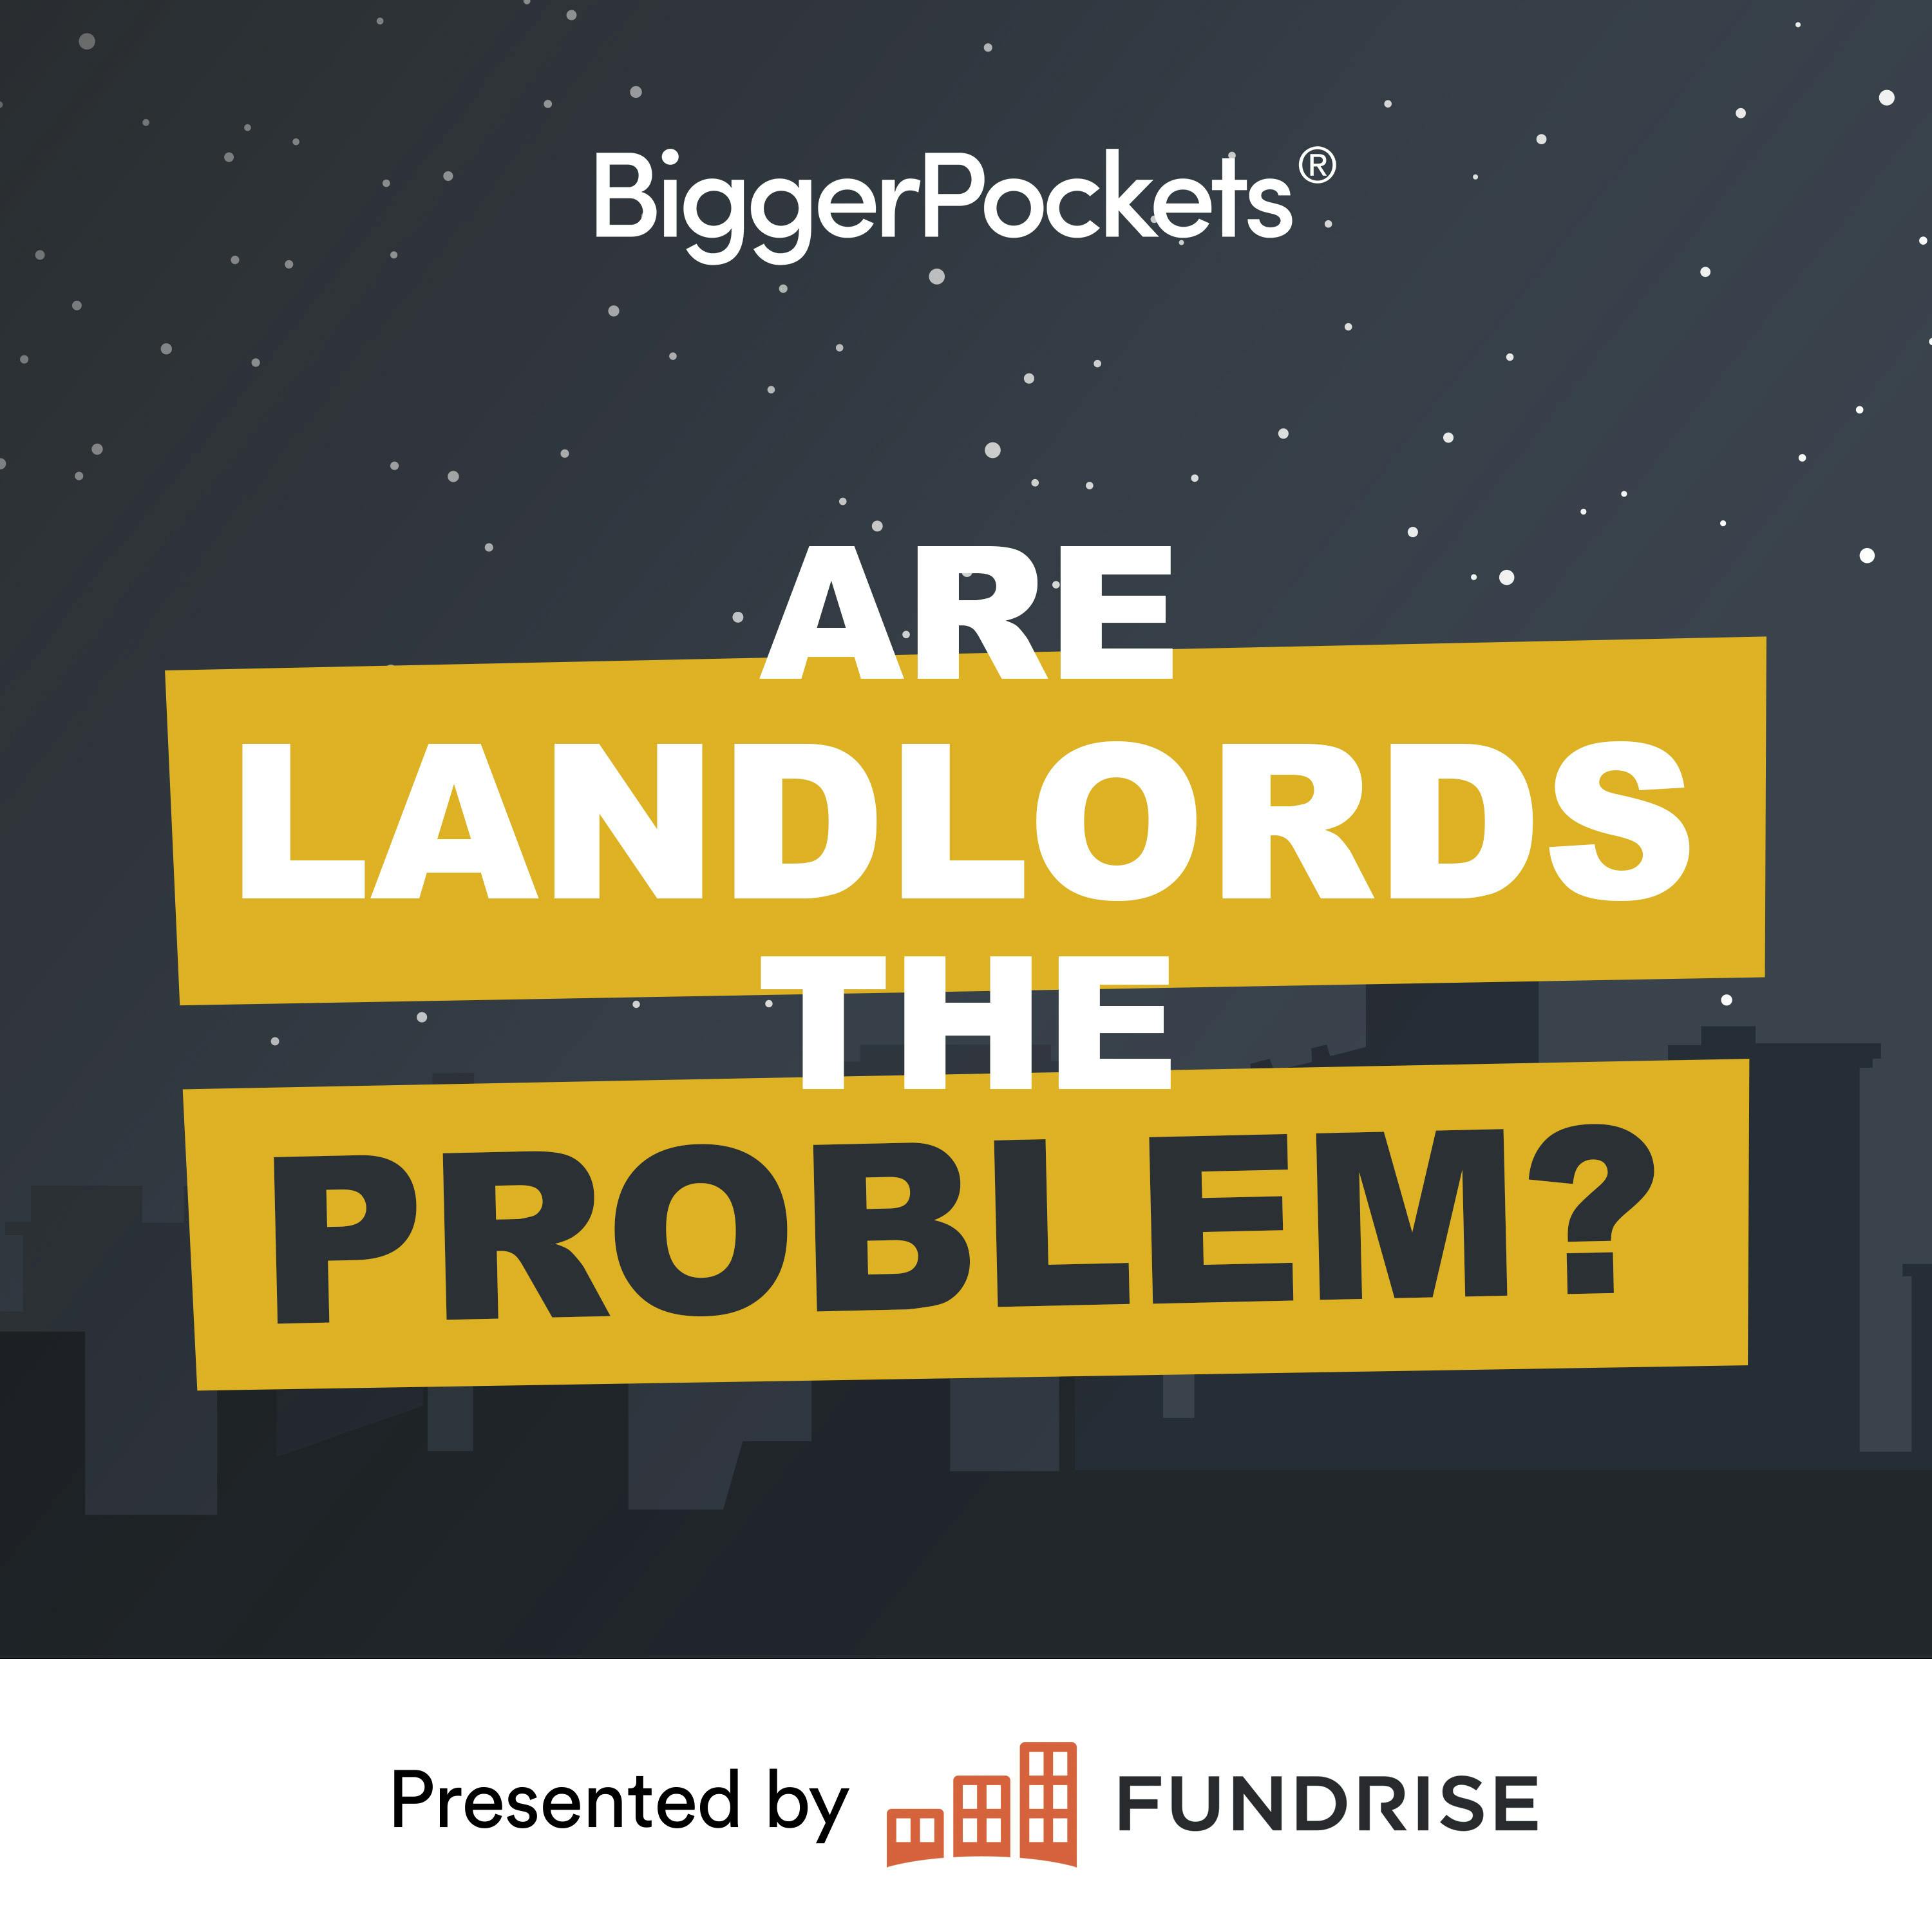 62: Homebuyers Are Getting Crushed: Are Landlords the Cause?